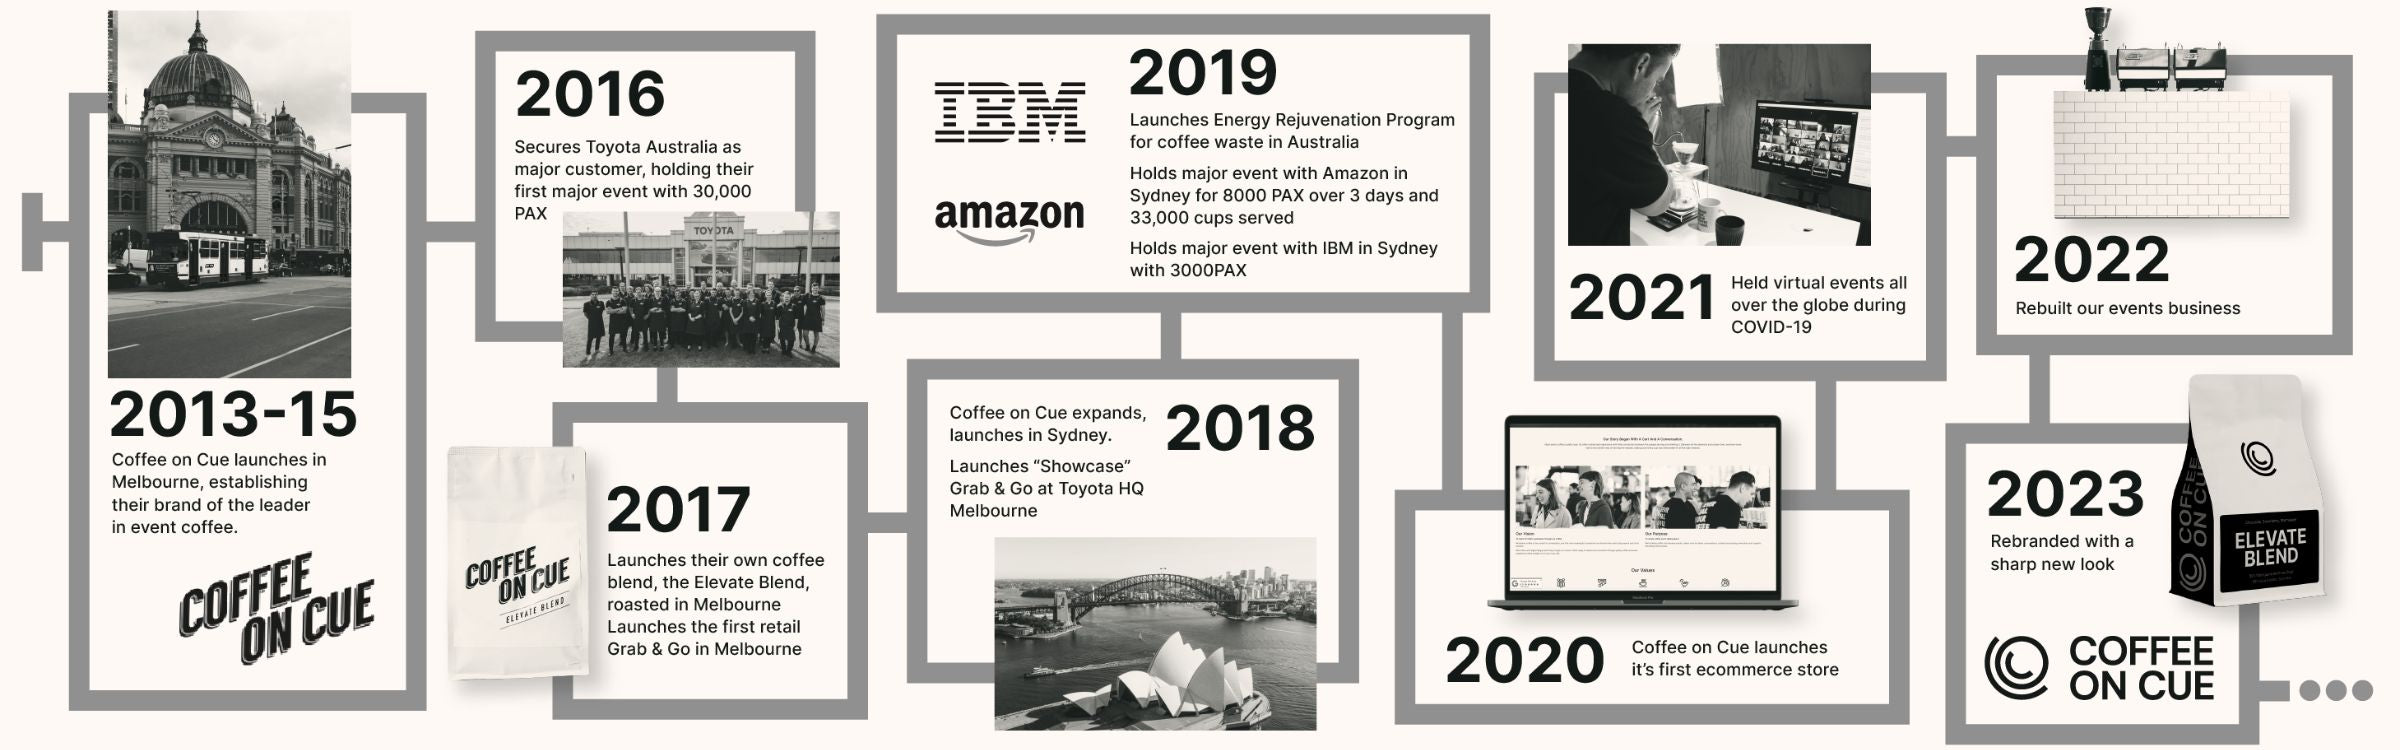 Coffee on Cue company history journey and roadmap in landscape view